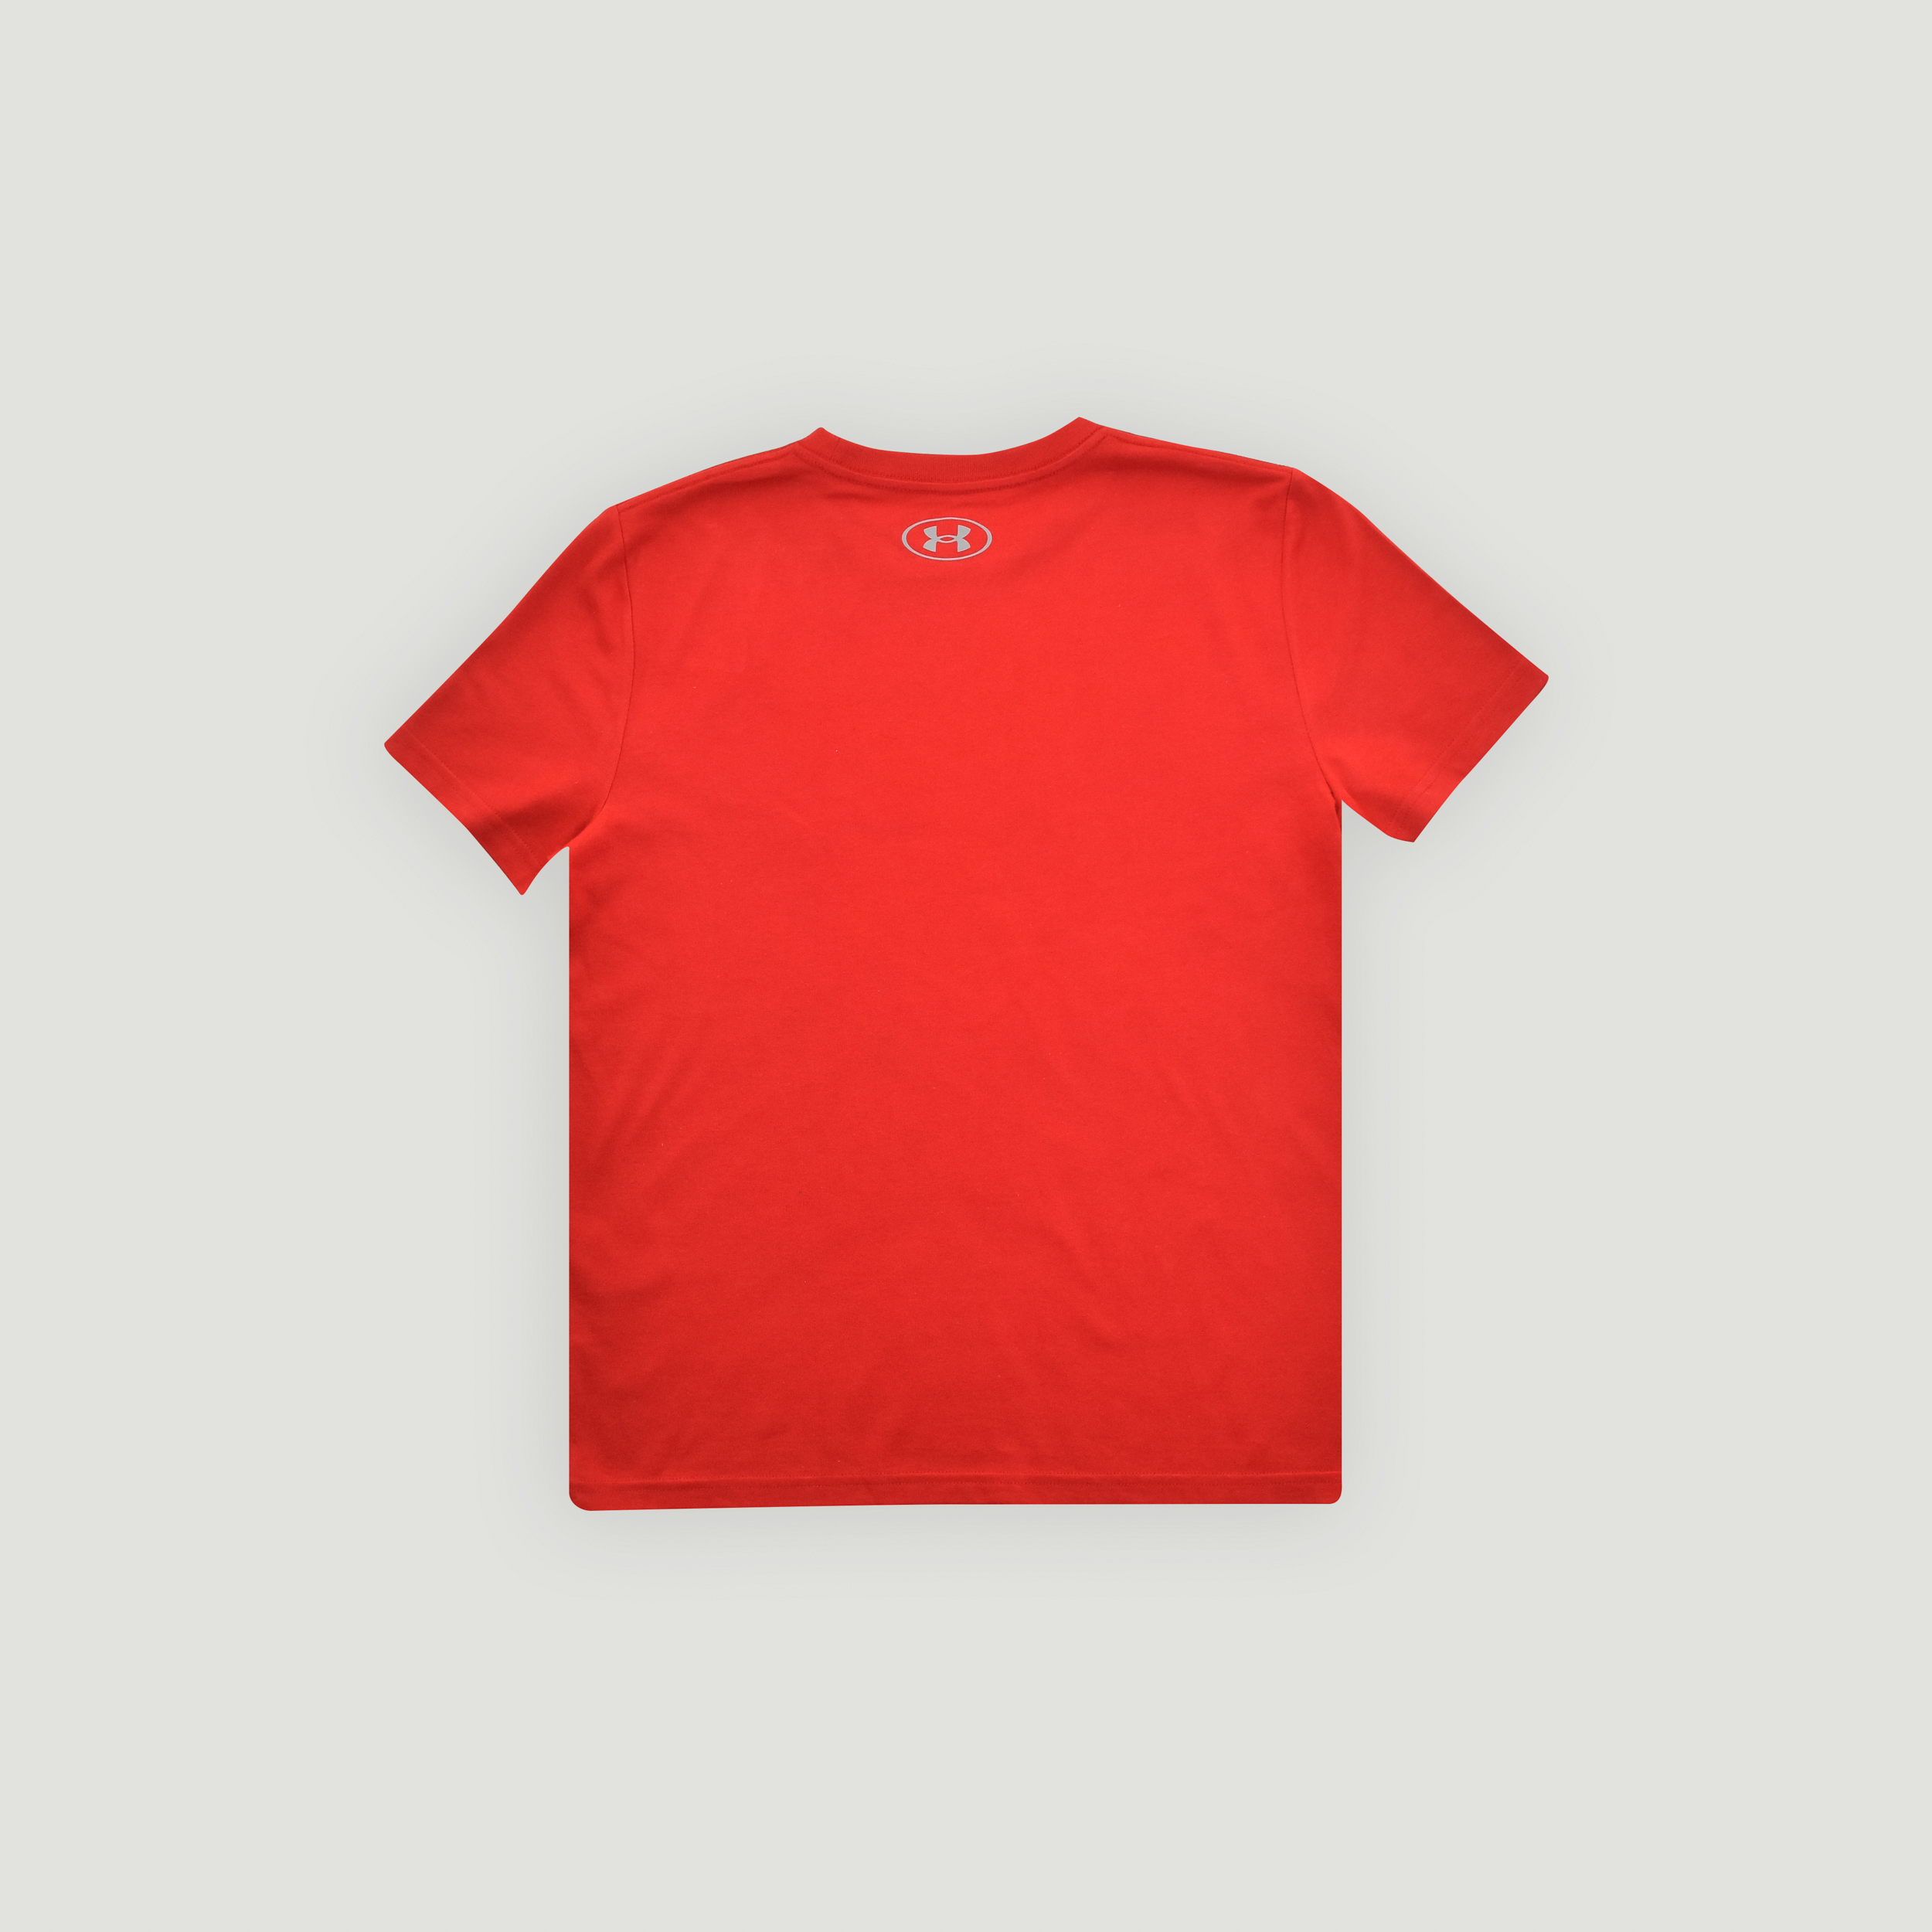 US Open Under Armour Youth Performance T-Shirt - Red